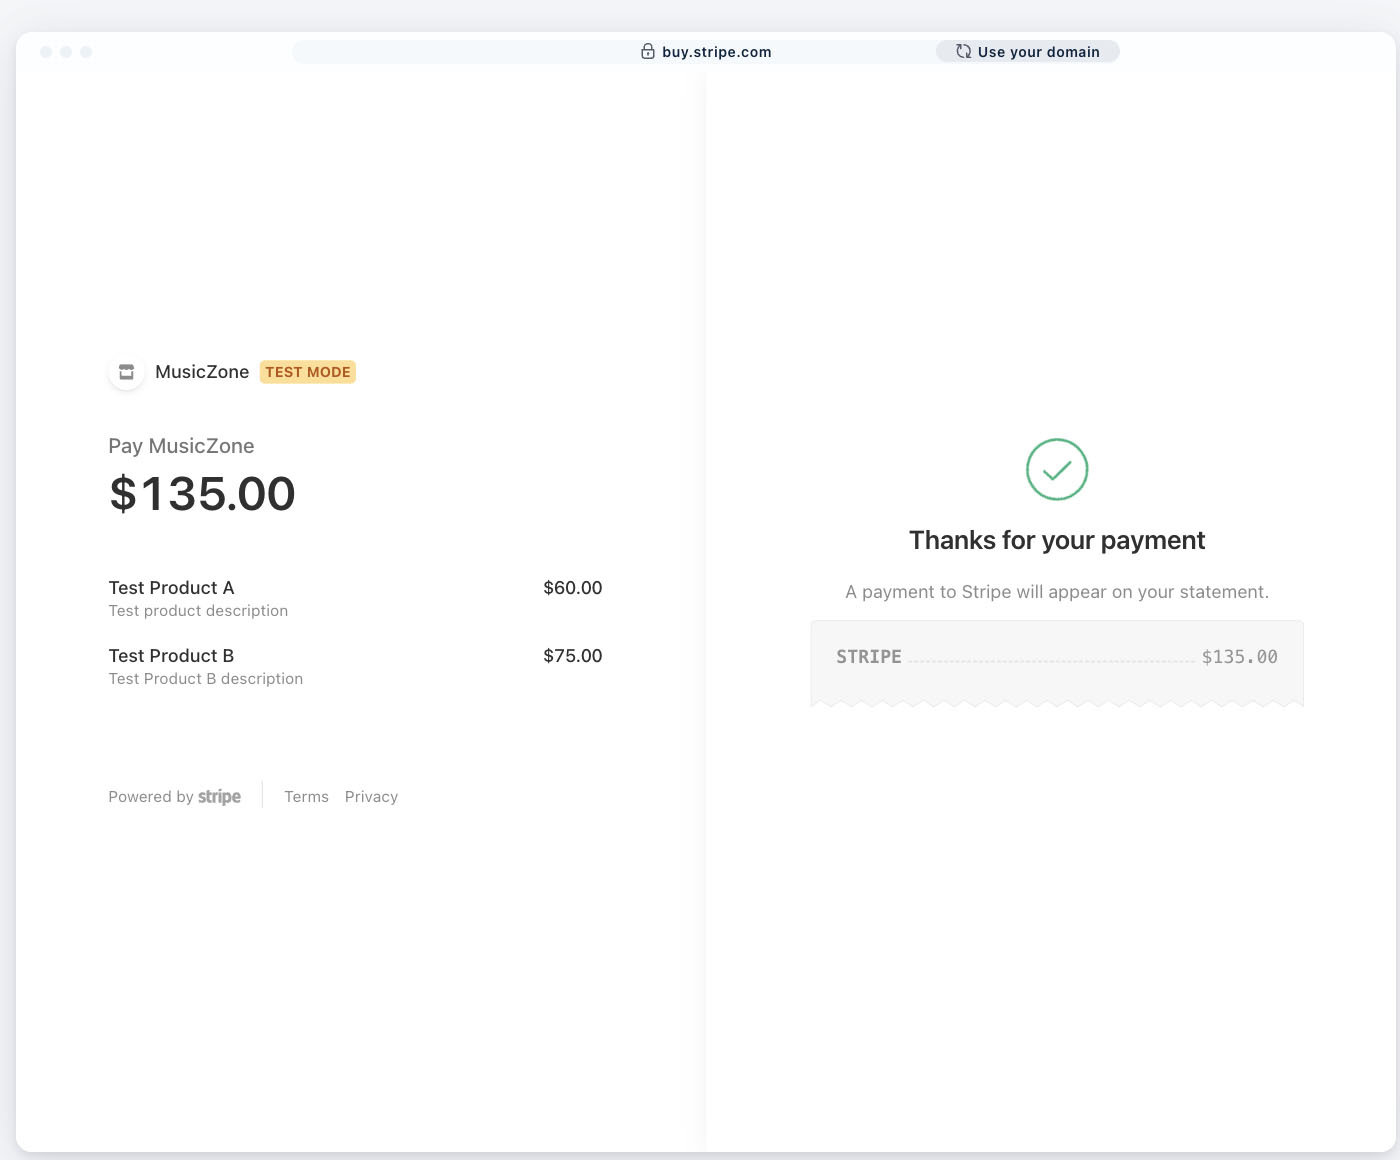 Stripe payment confirmation for paid online invoice.